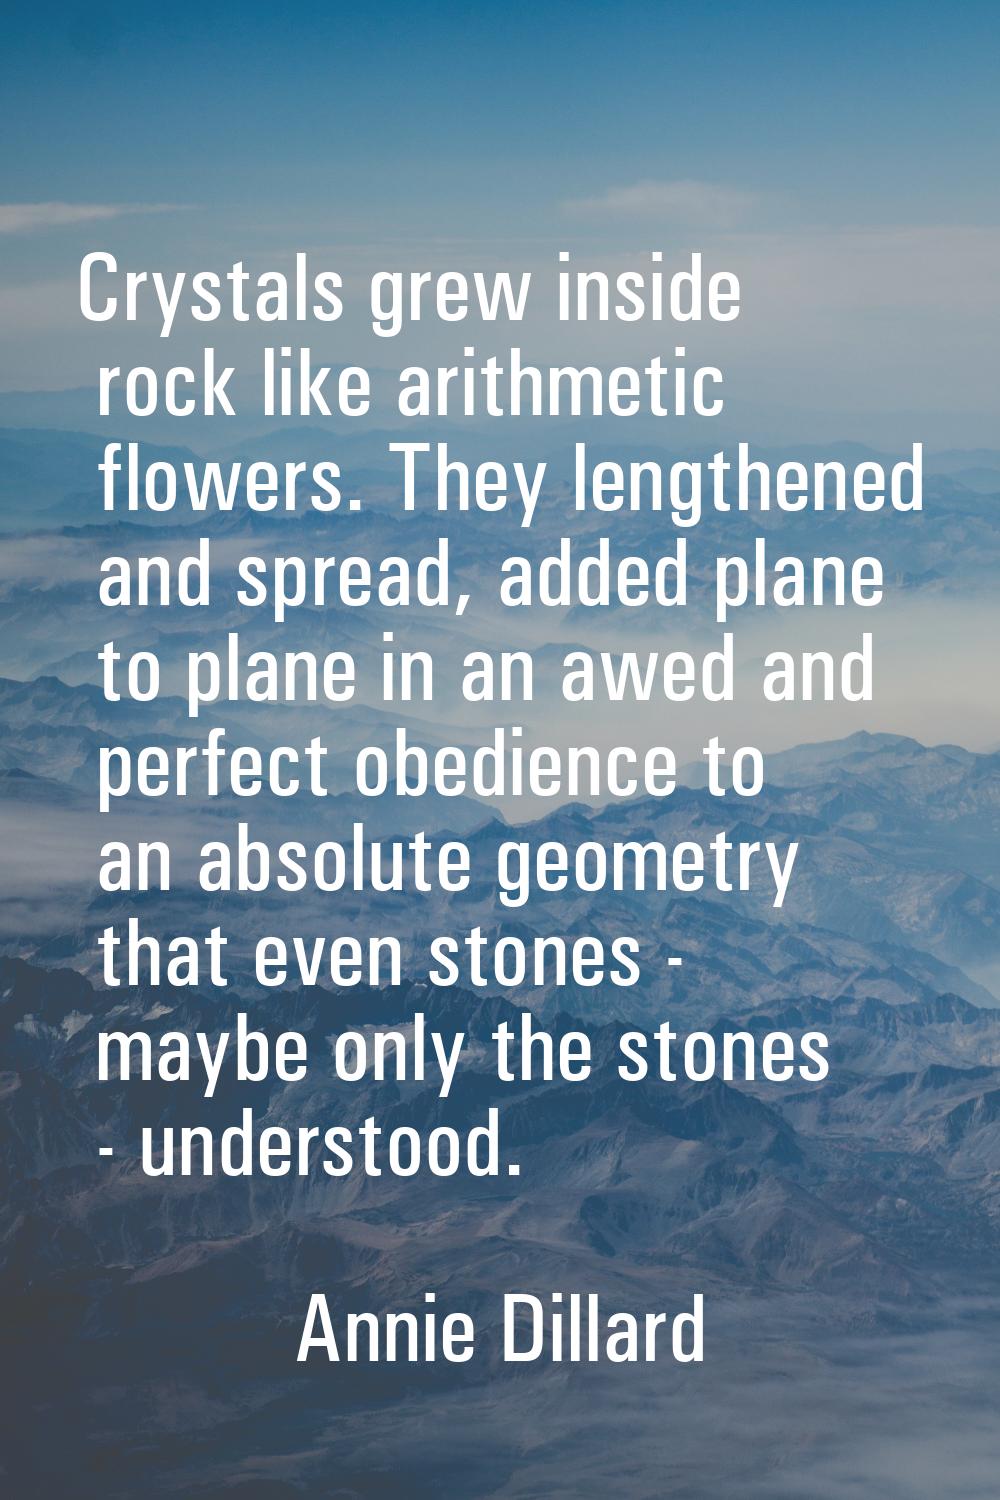 Crystals grew inside rock like arithmetic flowers. They lengthened and spread, added plane to plane